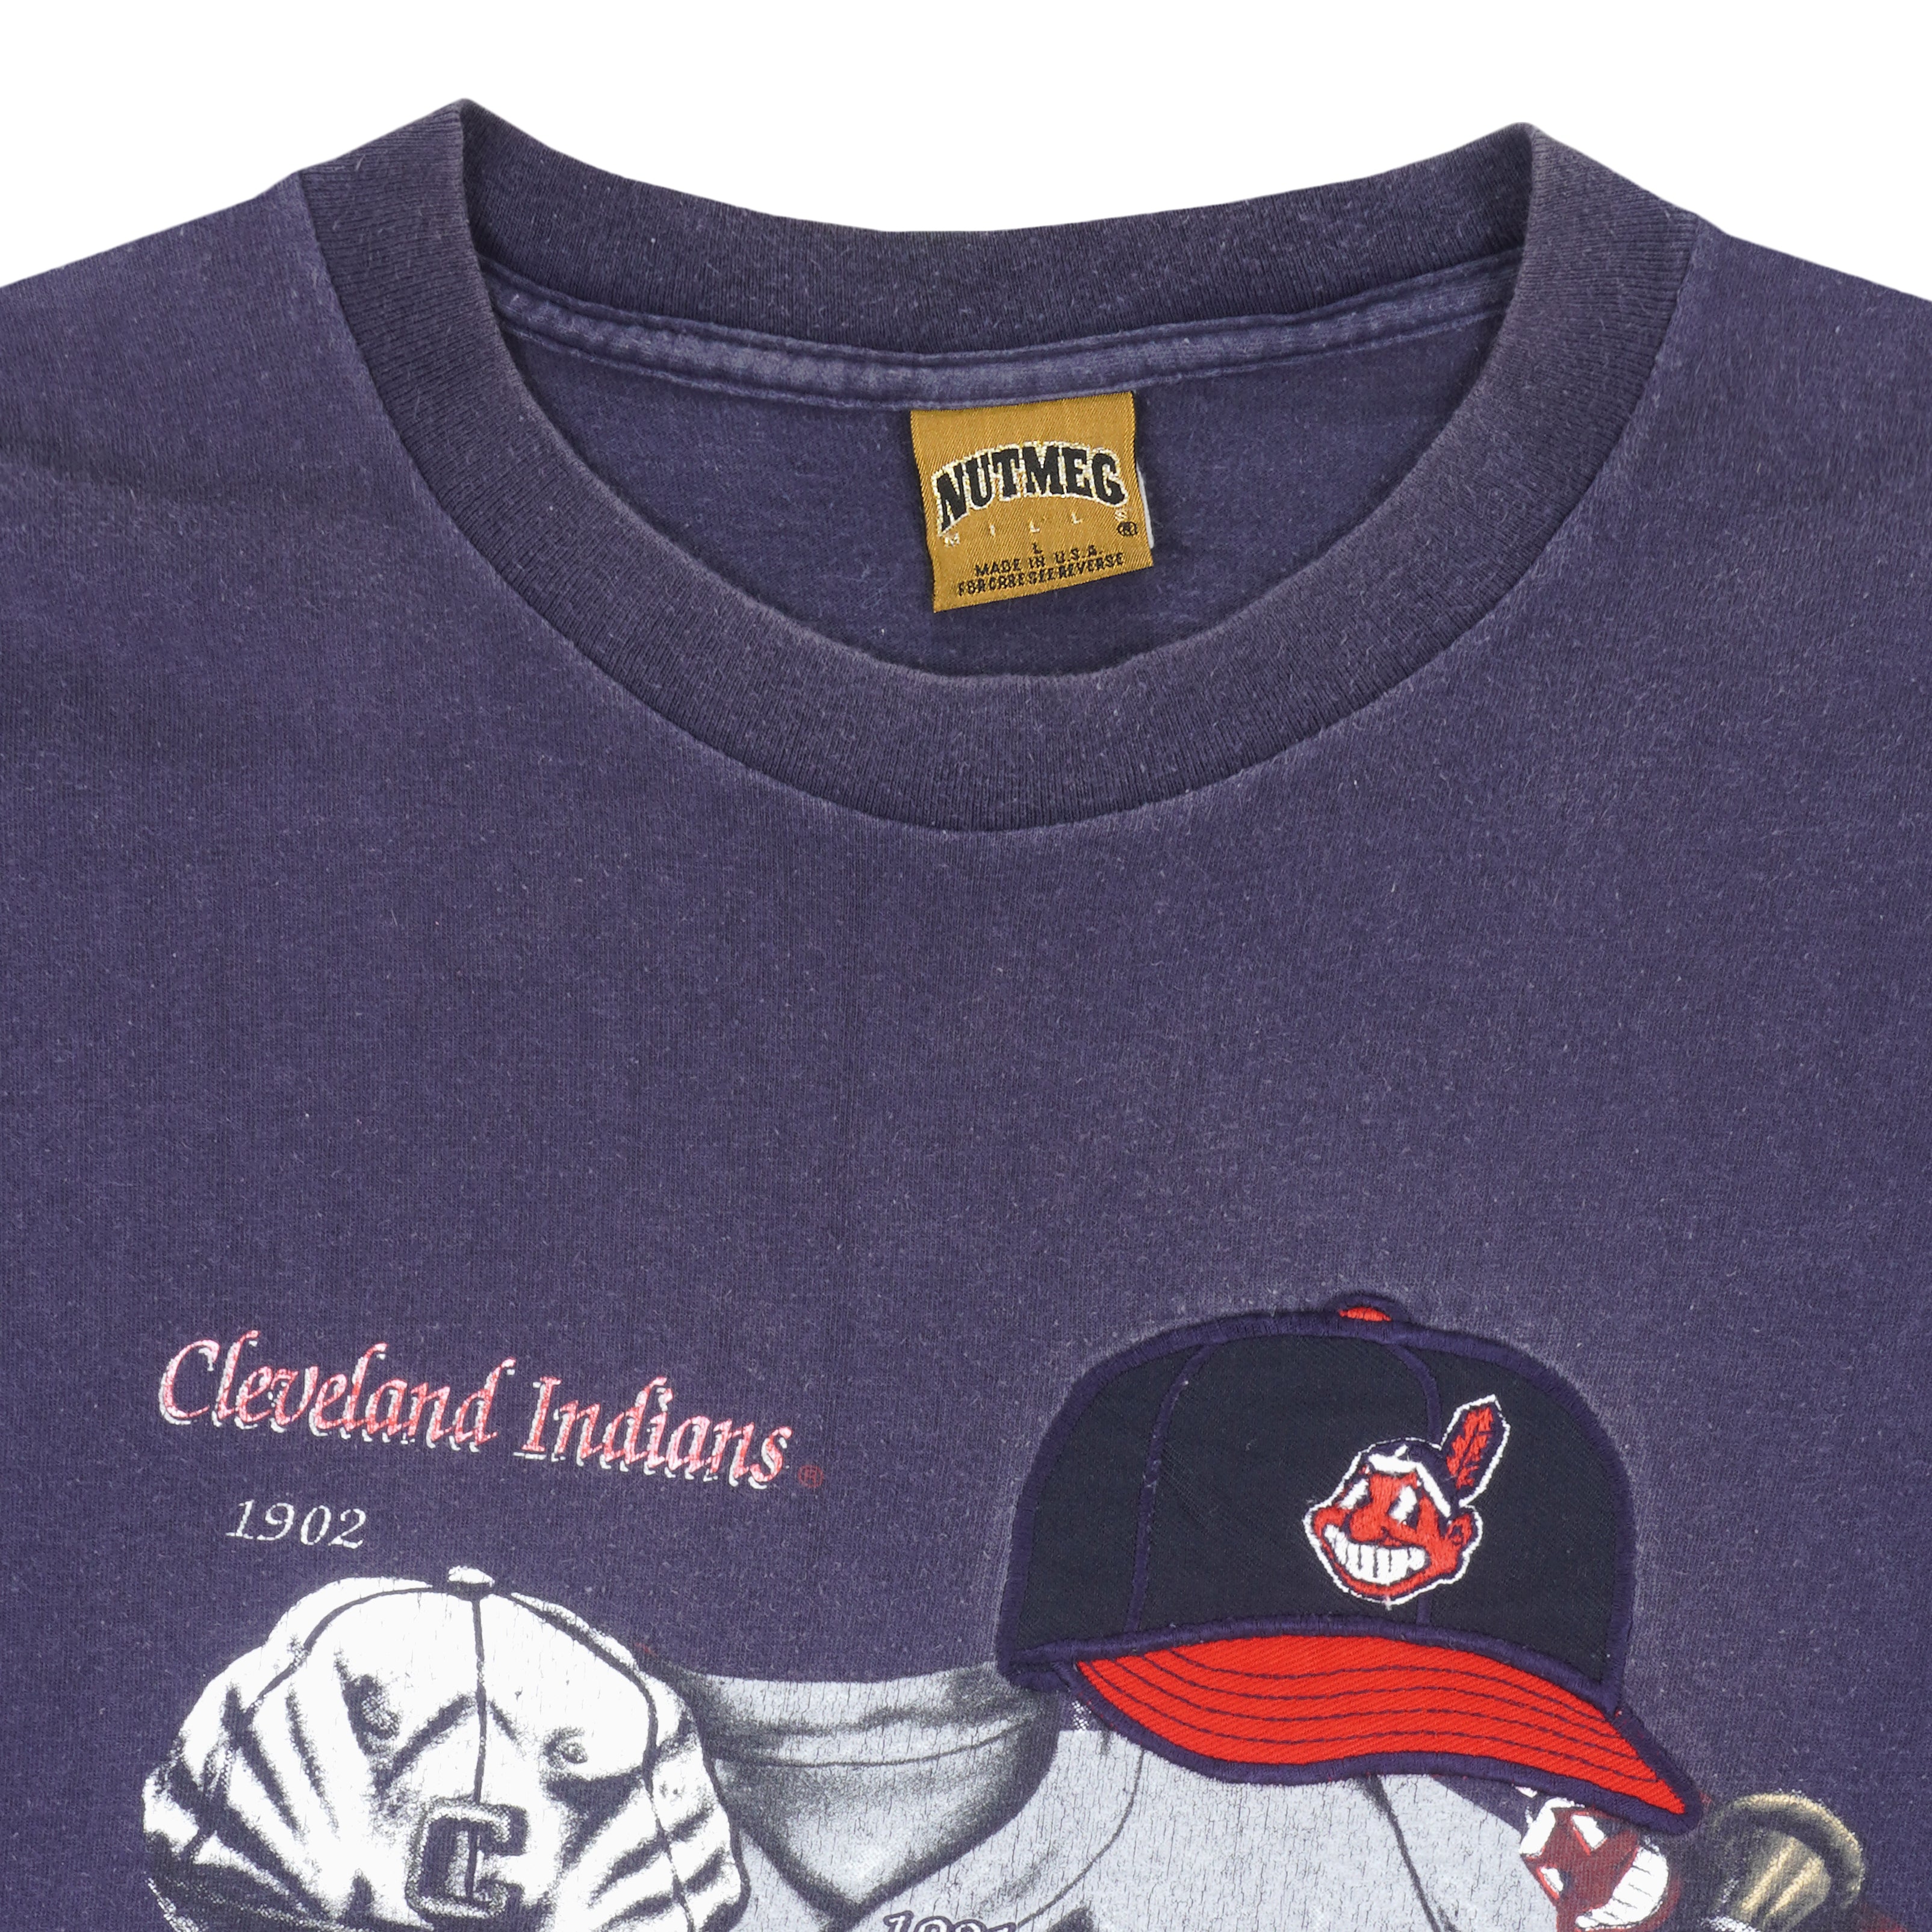 Cleveland Indians Apparel, Indians Clothing & Gear